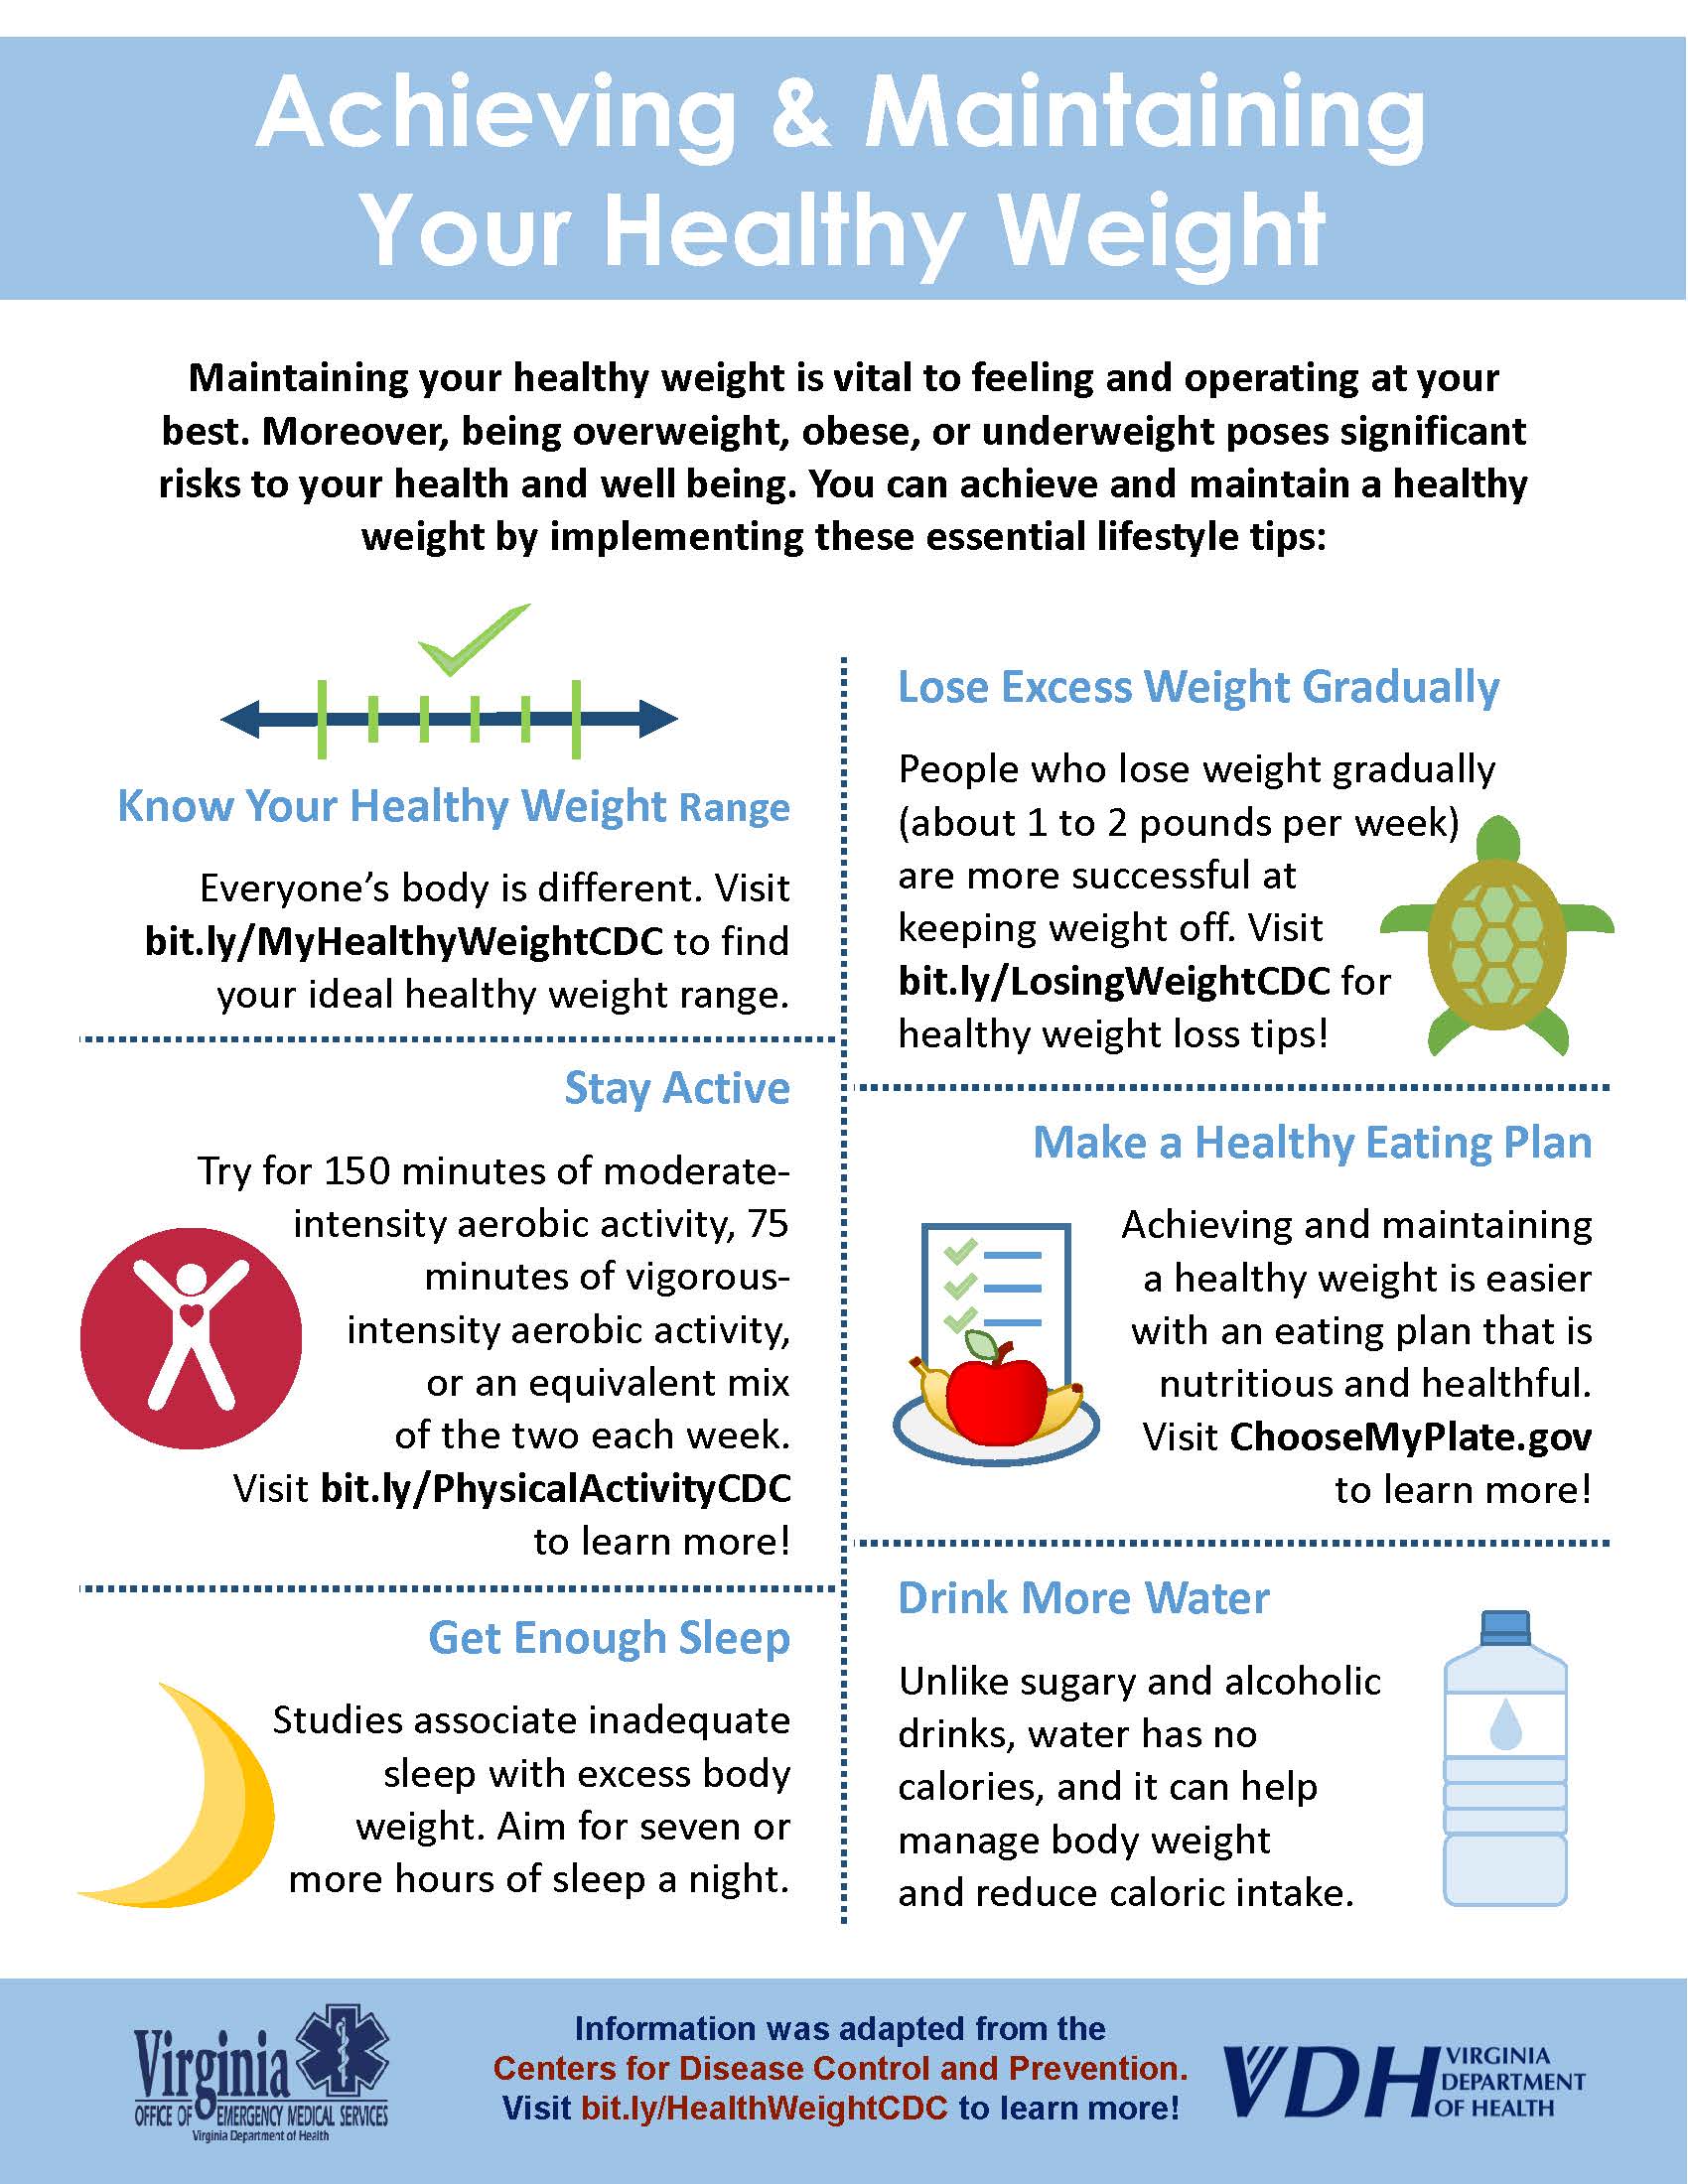 How can one achieve and maintain a healthy weight?